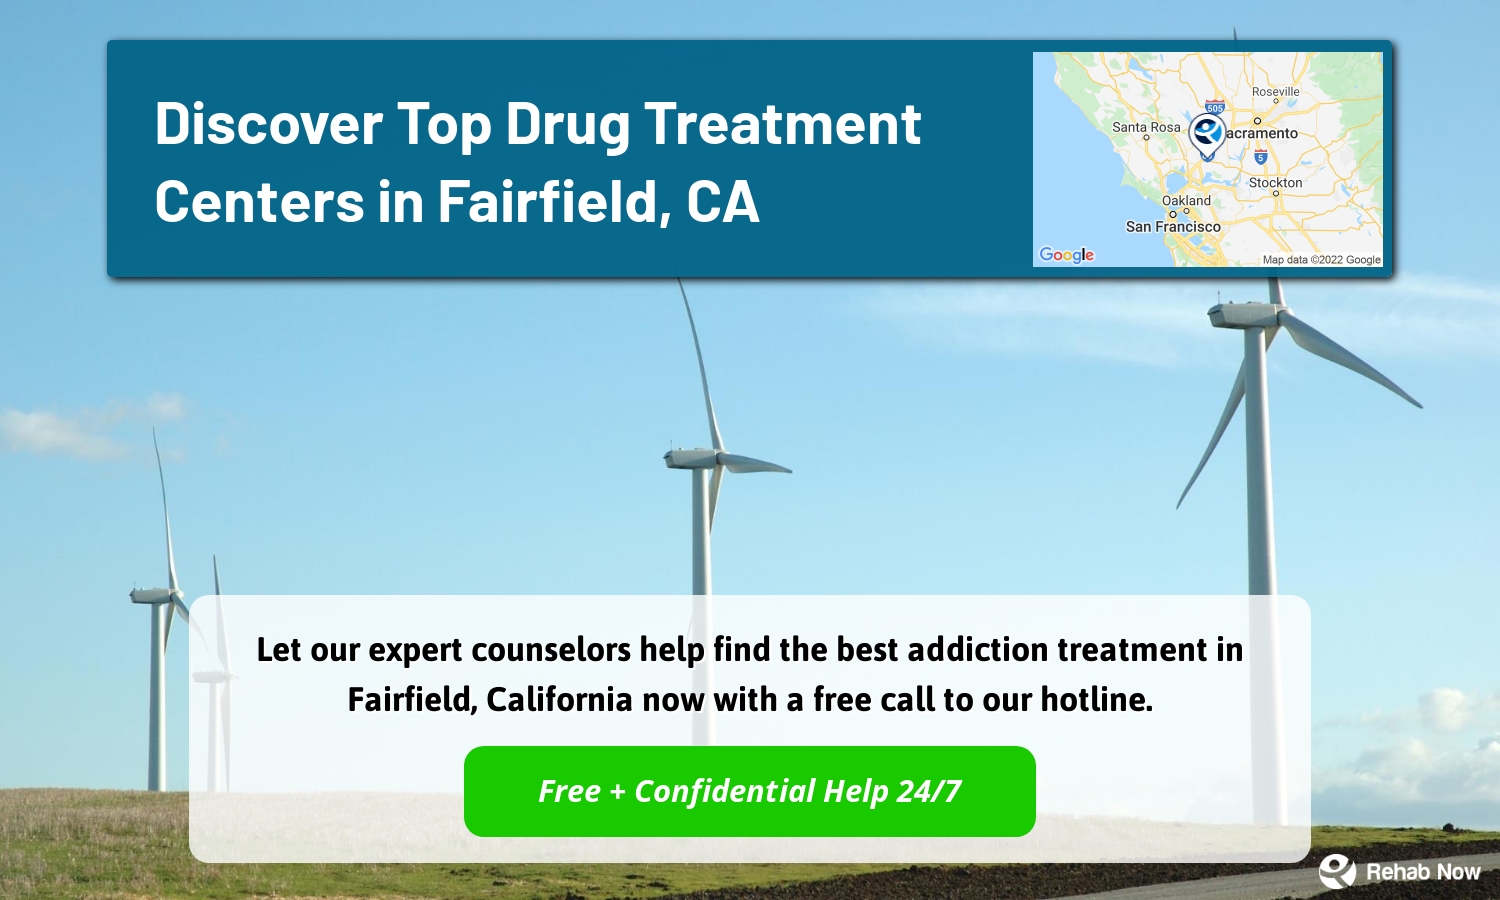 Let our expert counselors help find the best addiction treatment in Fairfield, California now with a free call to our hotline.